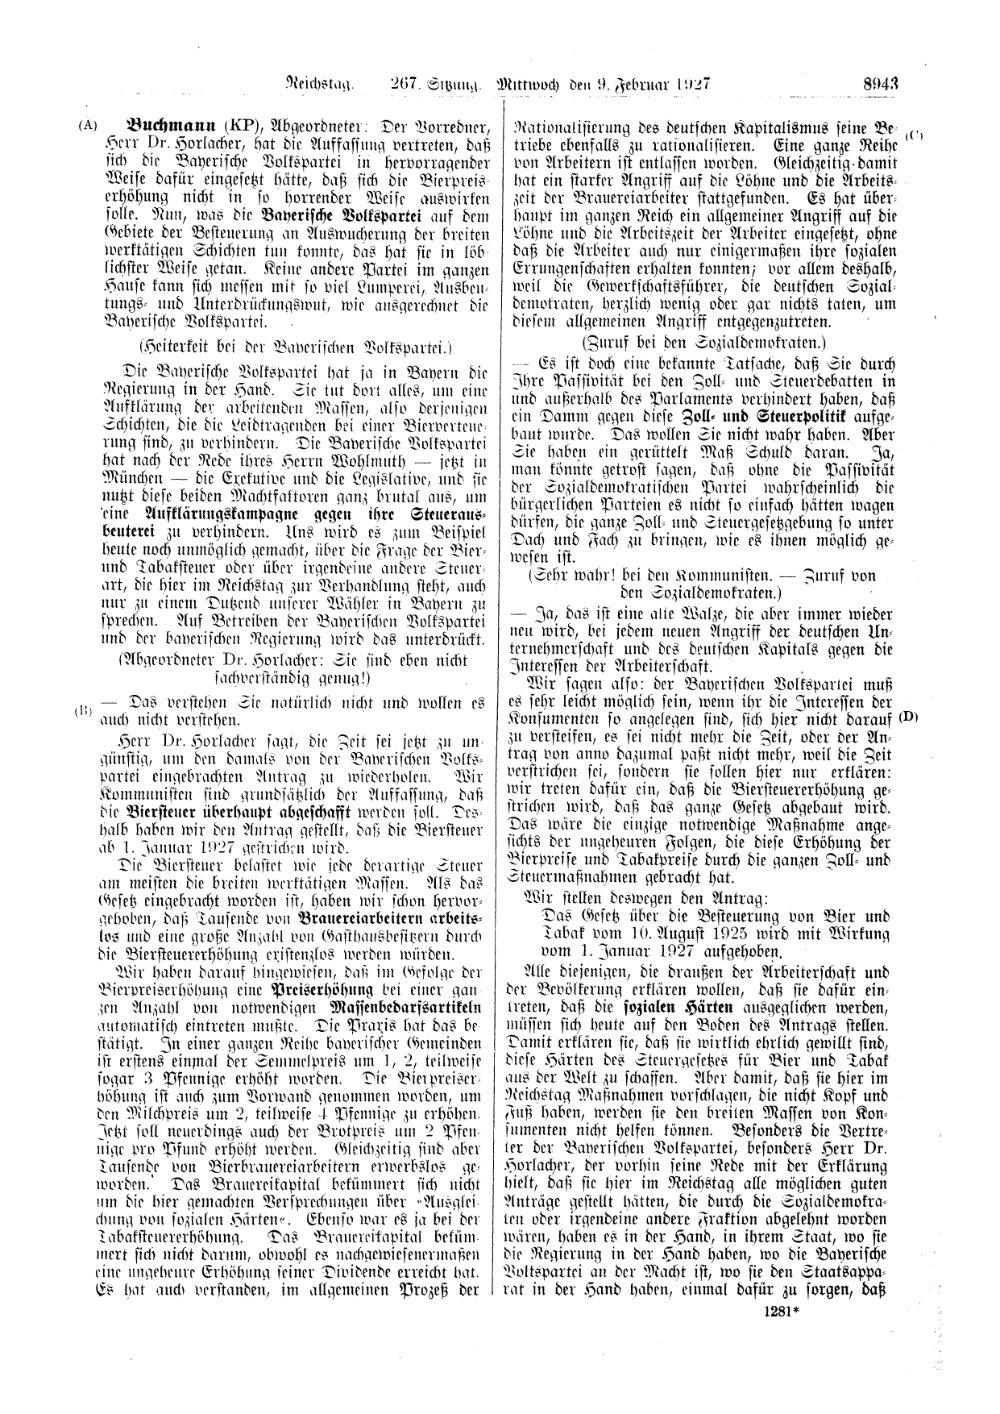 Scan of page 8943